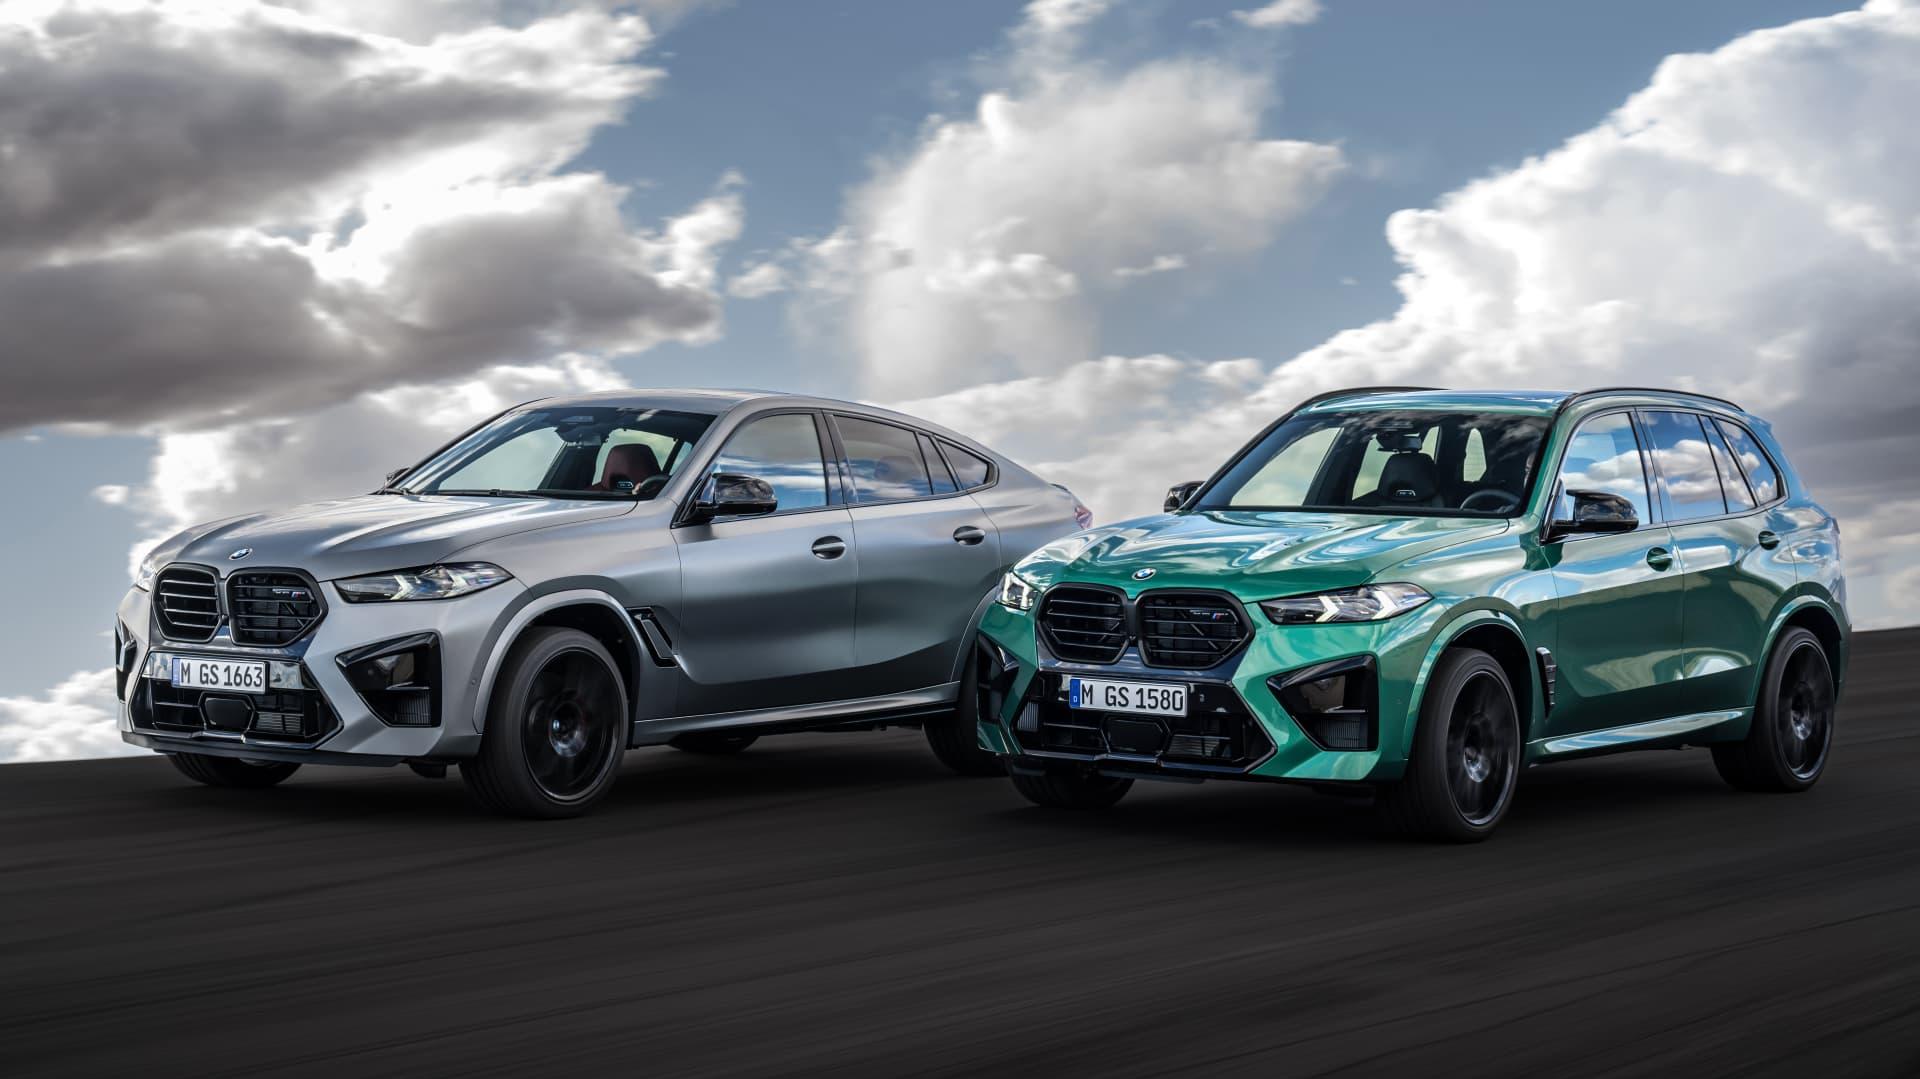  BMW X5 M X6 M price and specs Facelift prices rise by